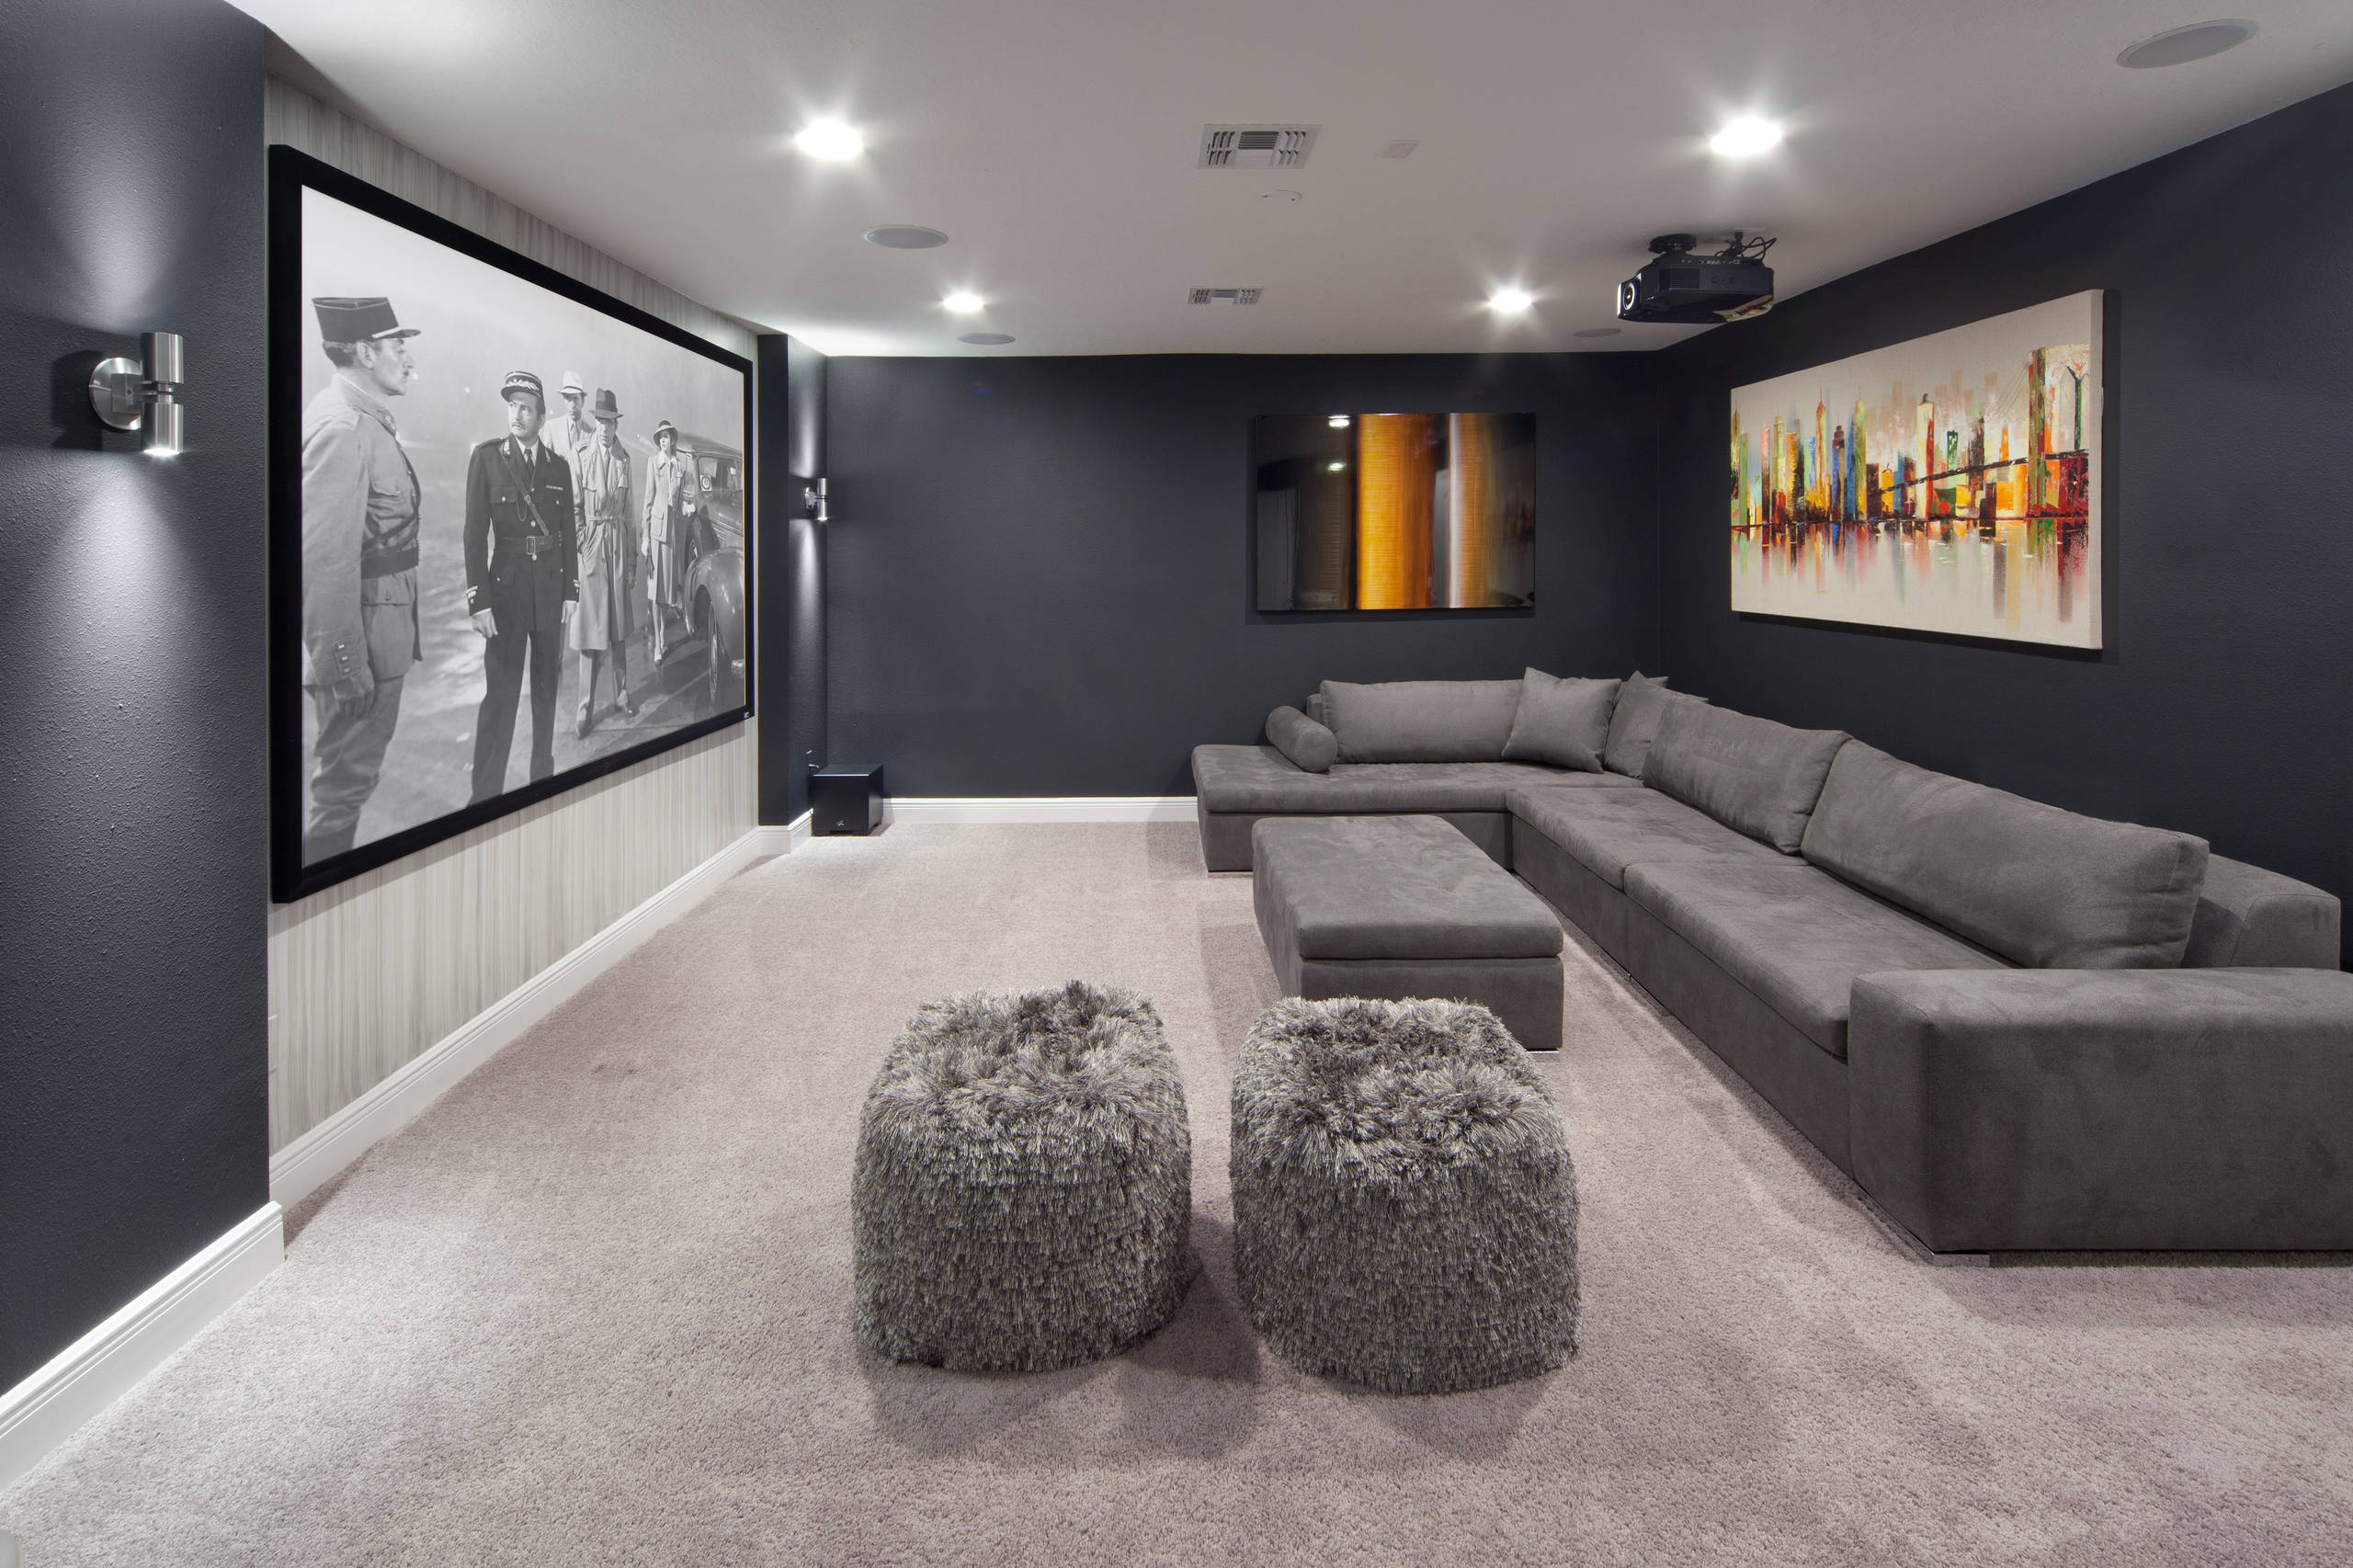 75 Home Theater Ideas You'll Love - January, 2023 | Houzz